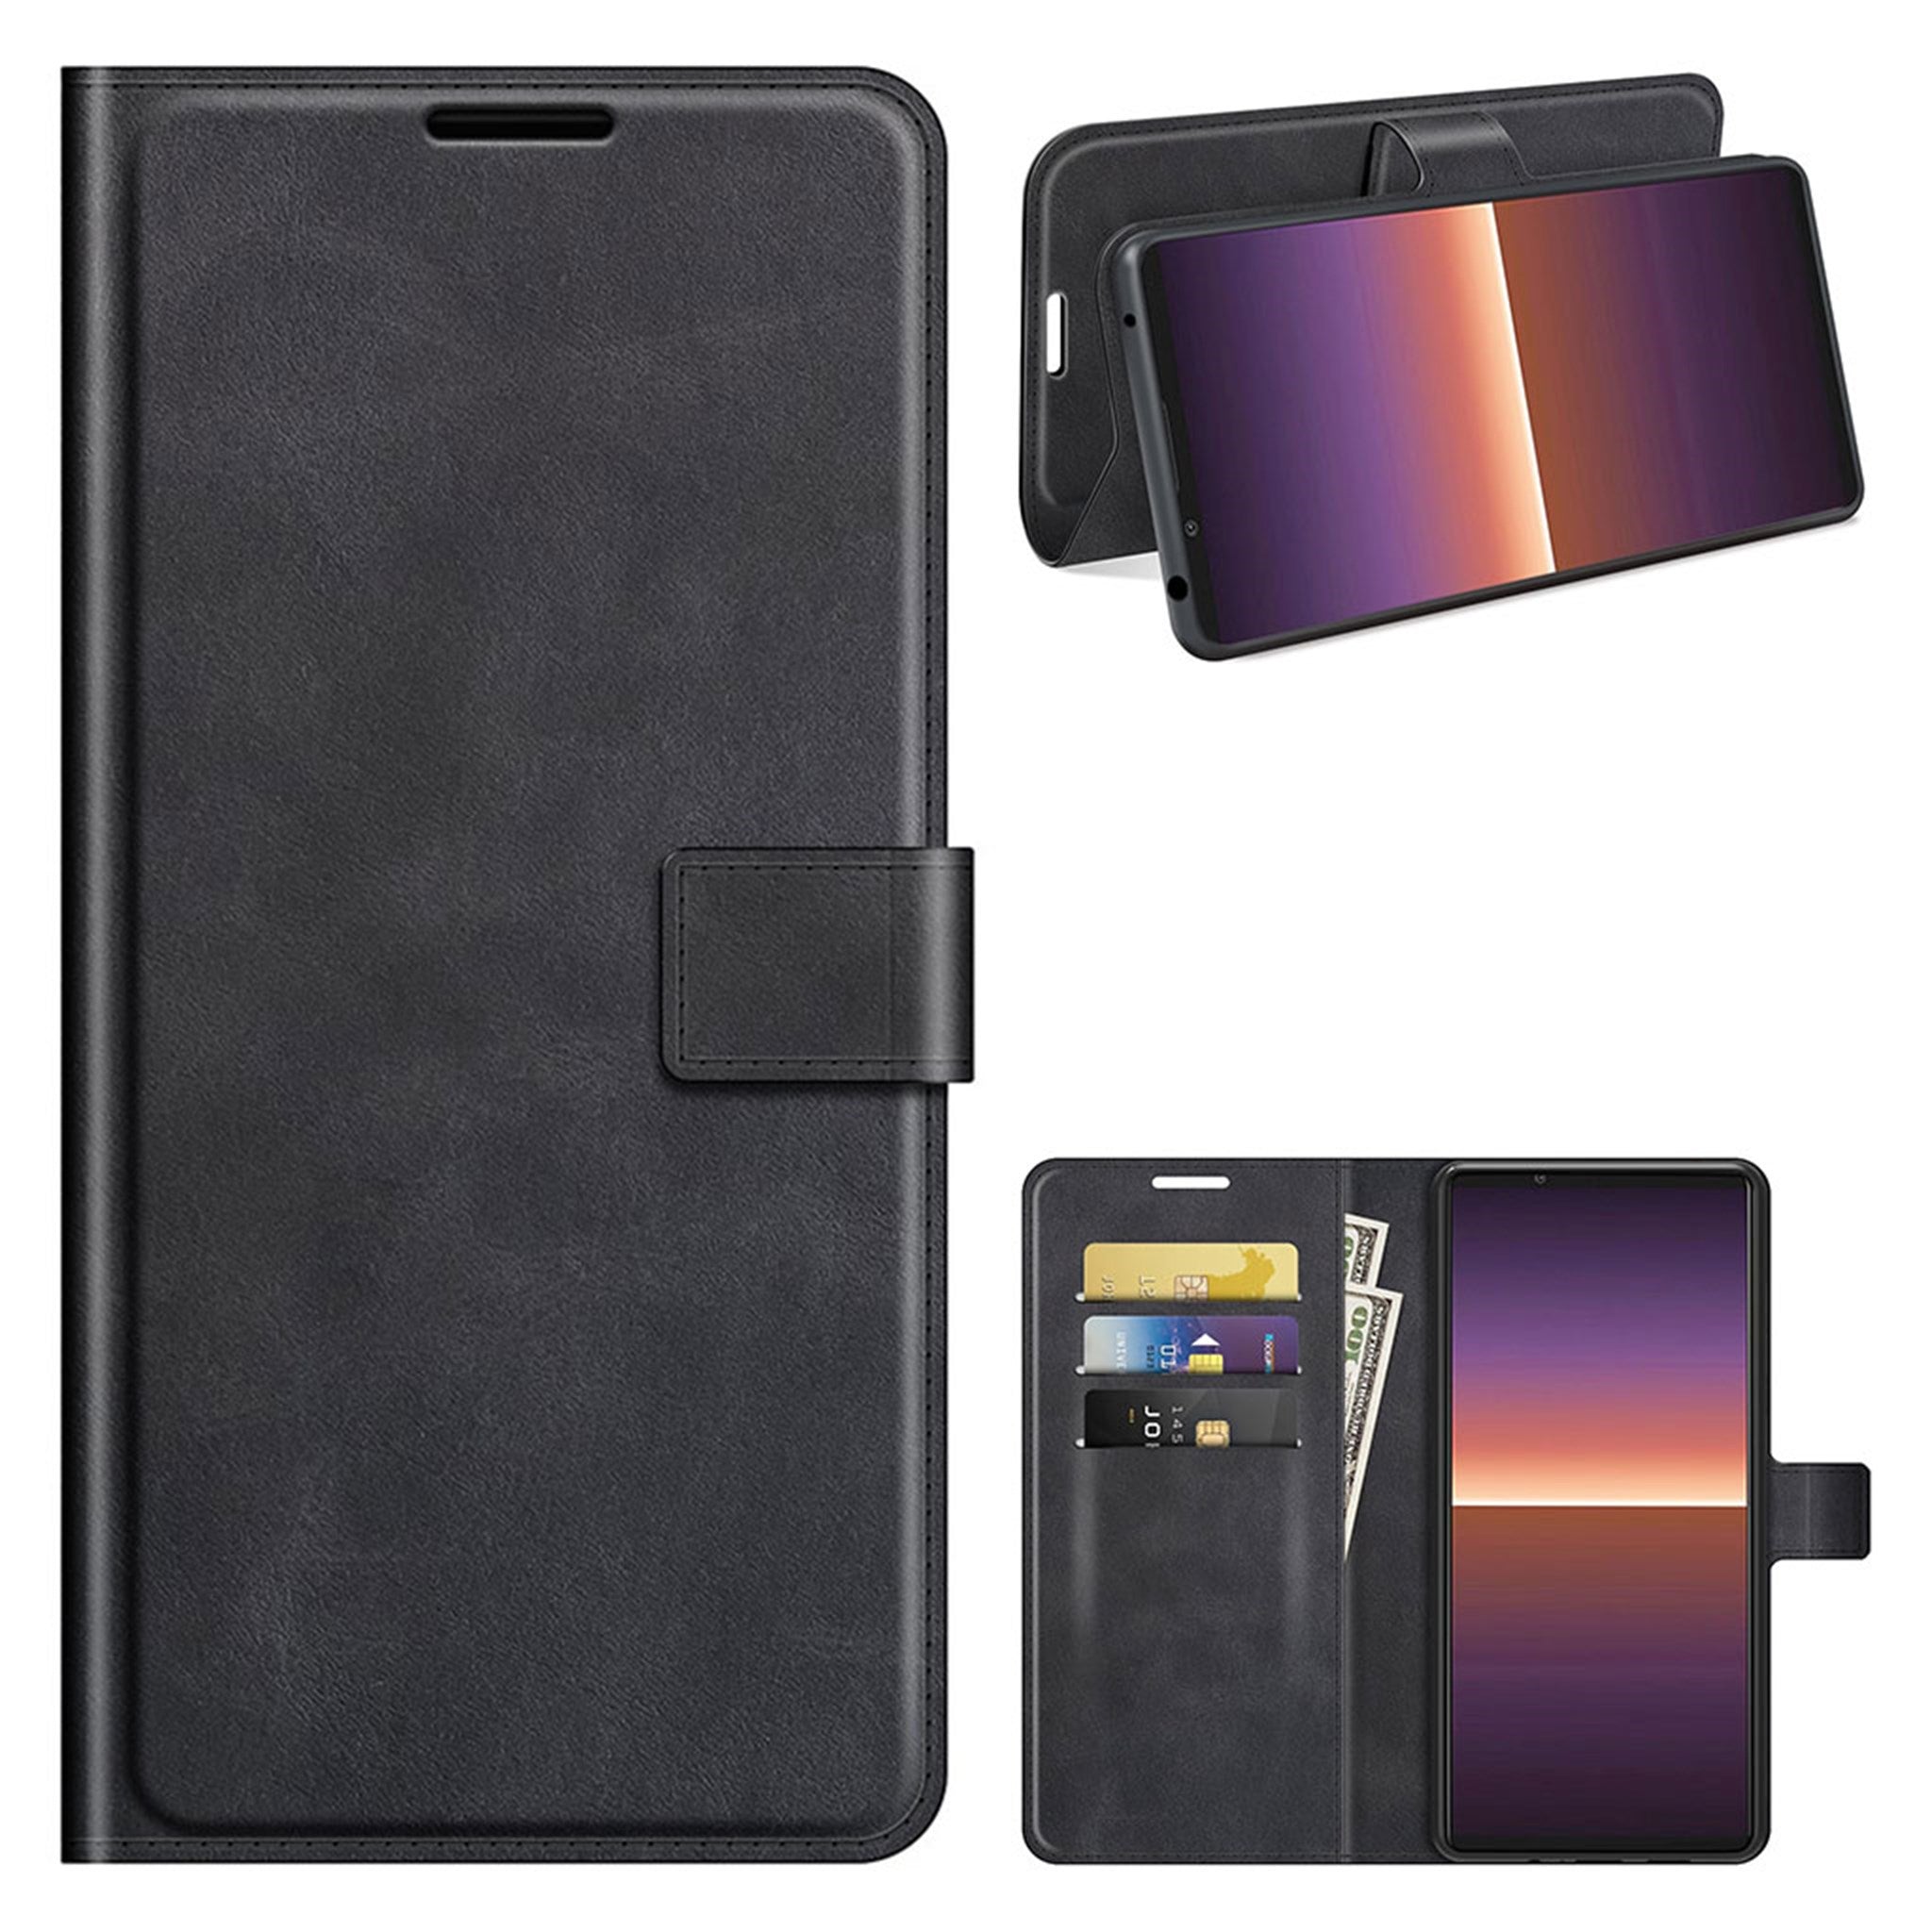 Wallet-style leather case for Sony Xperia 1 III - Black